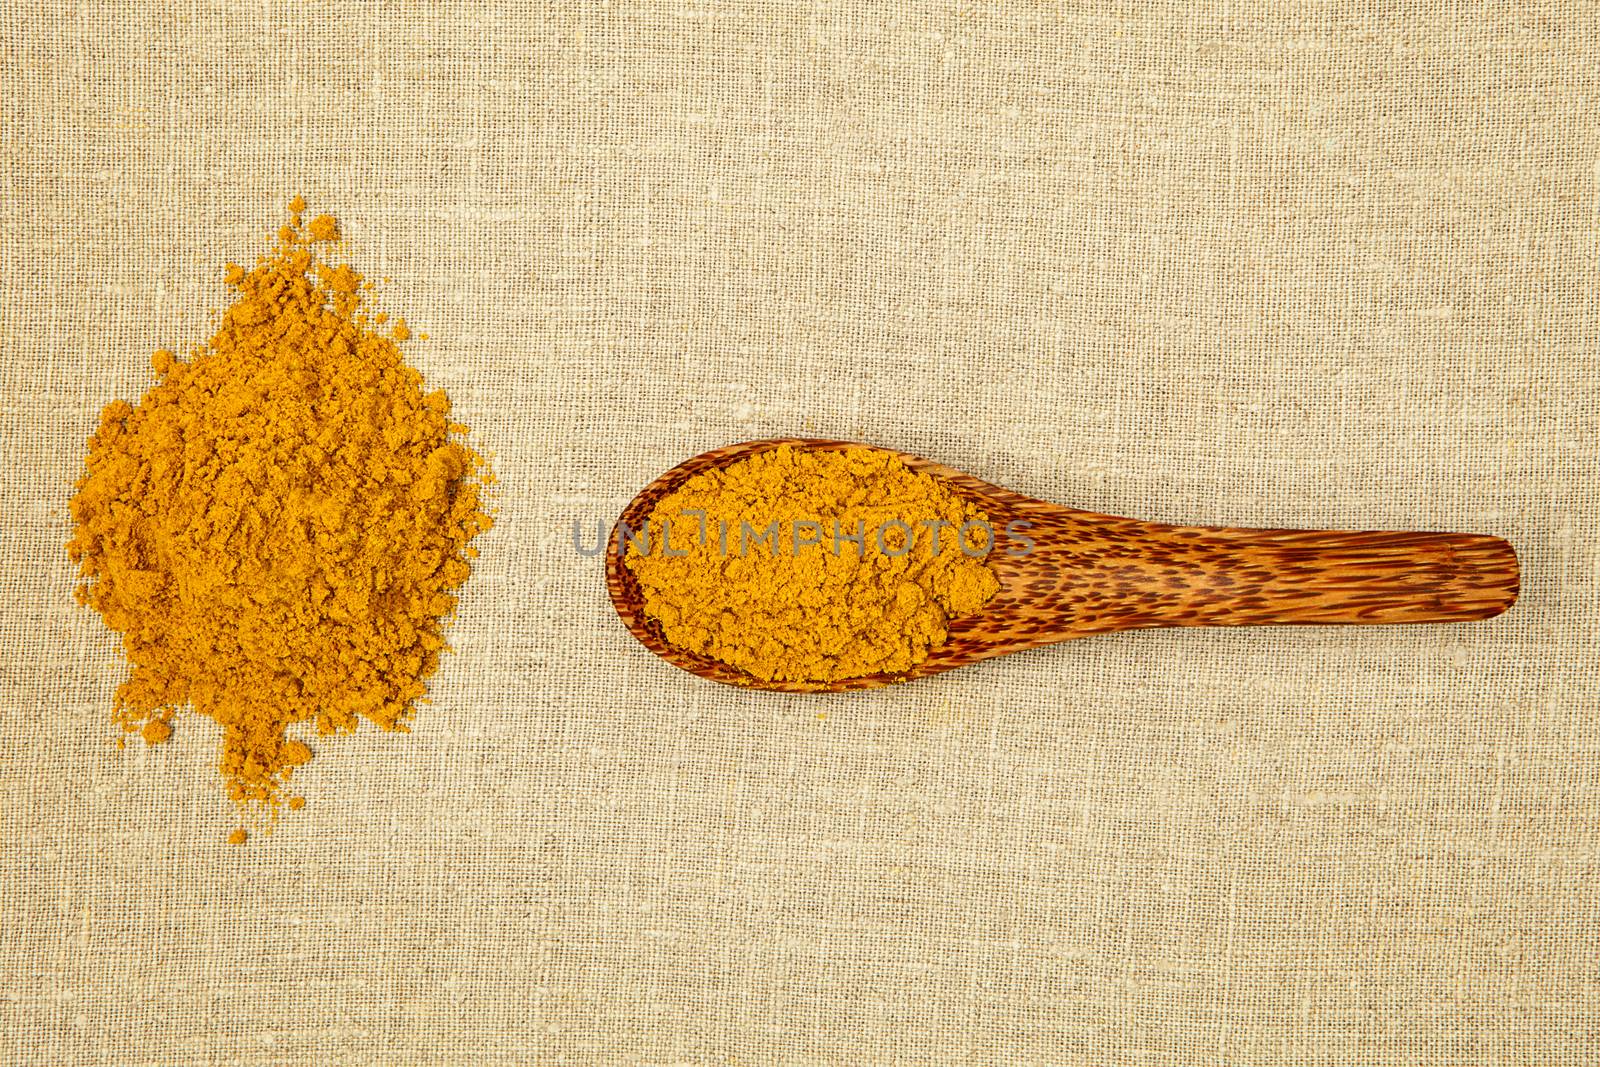 Curry spice on bamboo spoon - top view.